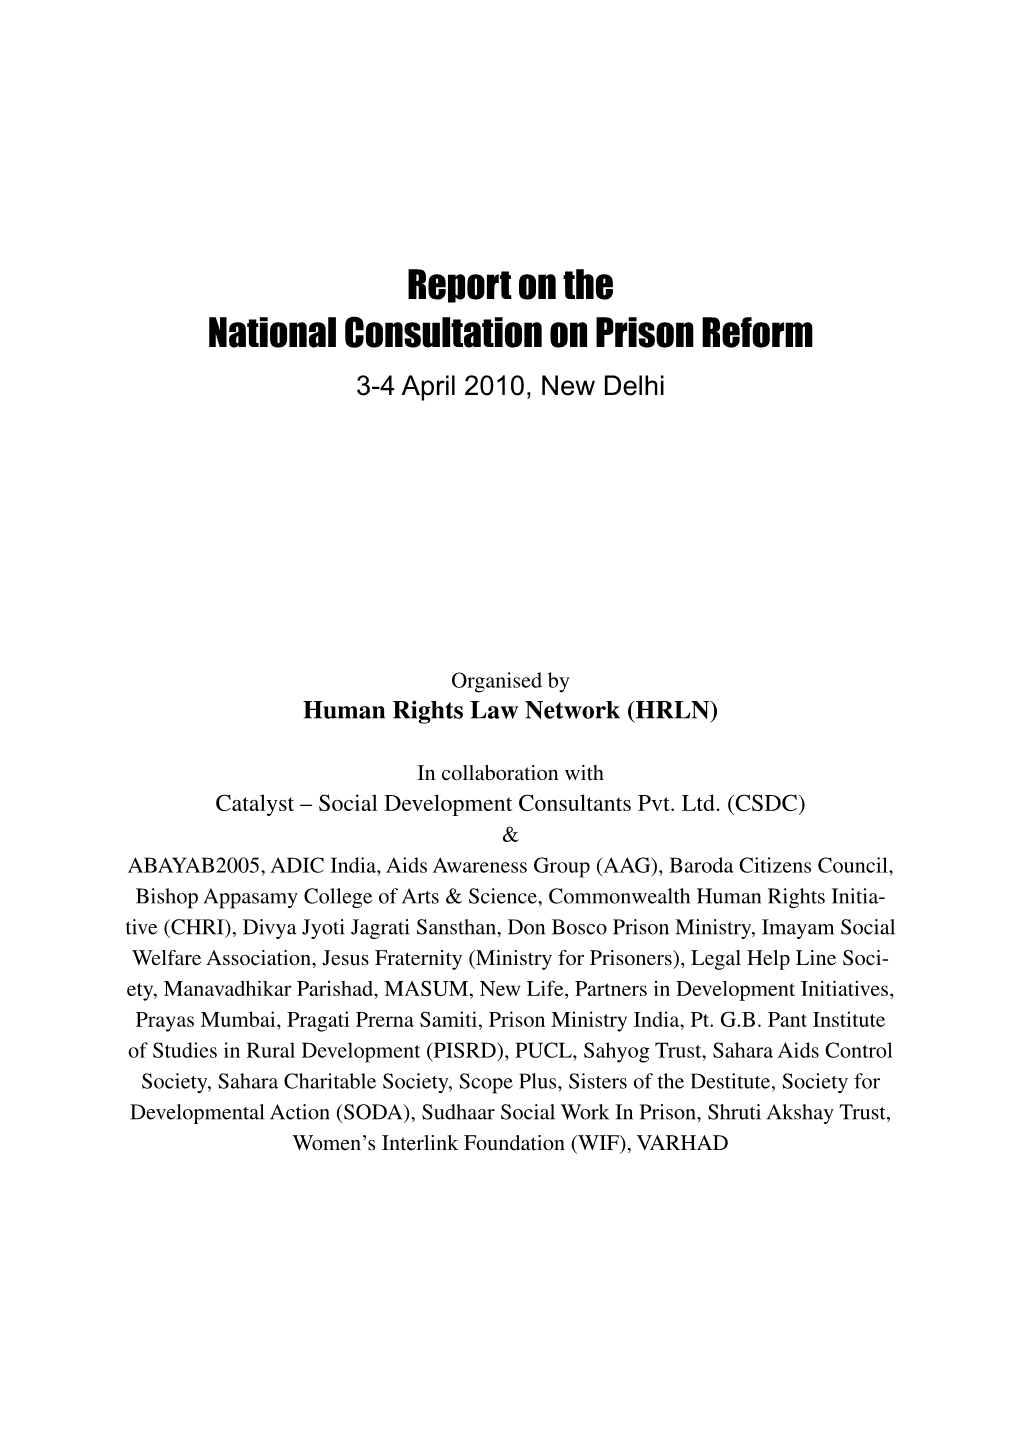 Report on the National Consultation on Prison Reform 3-4 April 2010, New Delhi